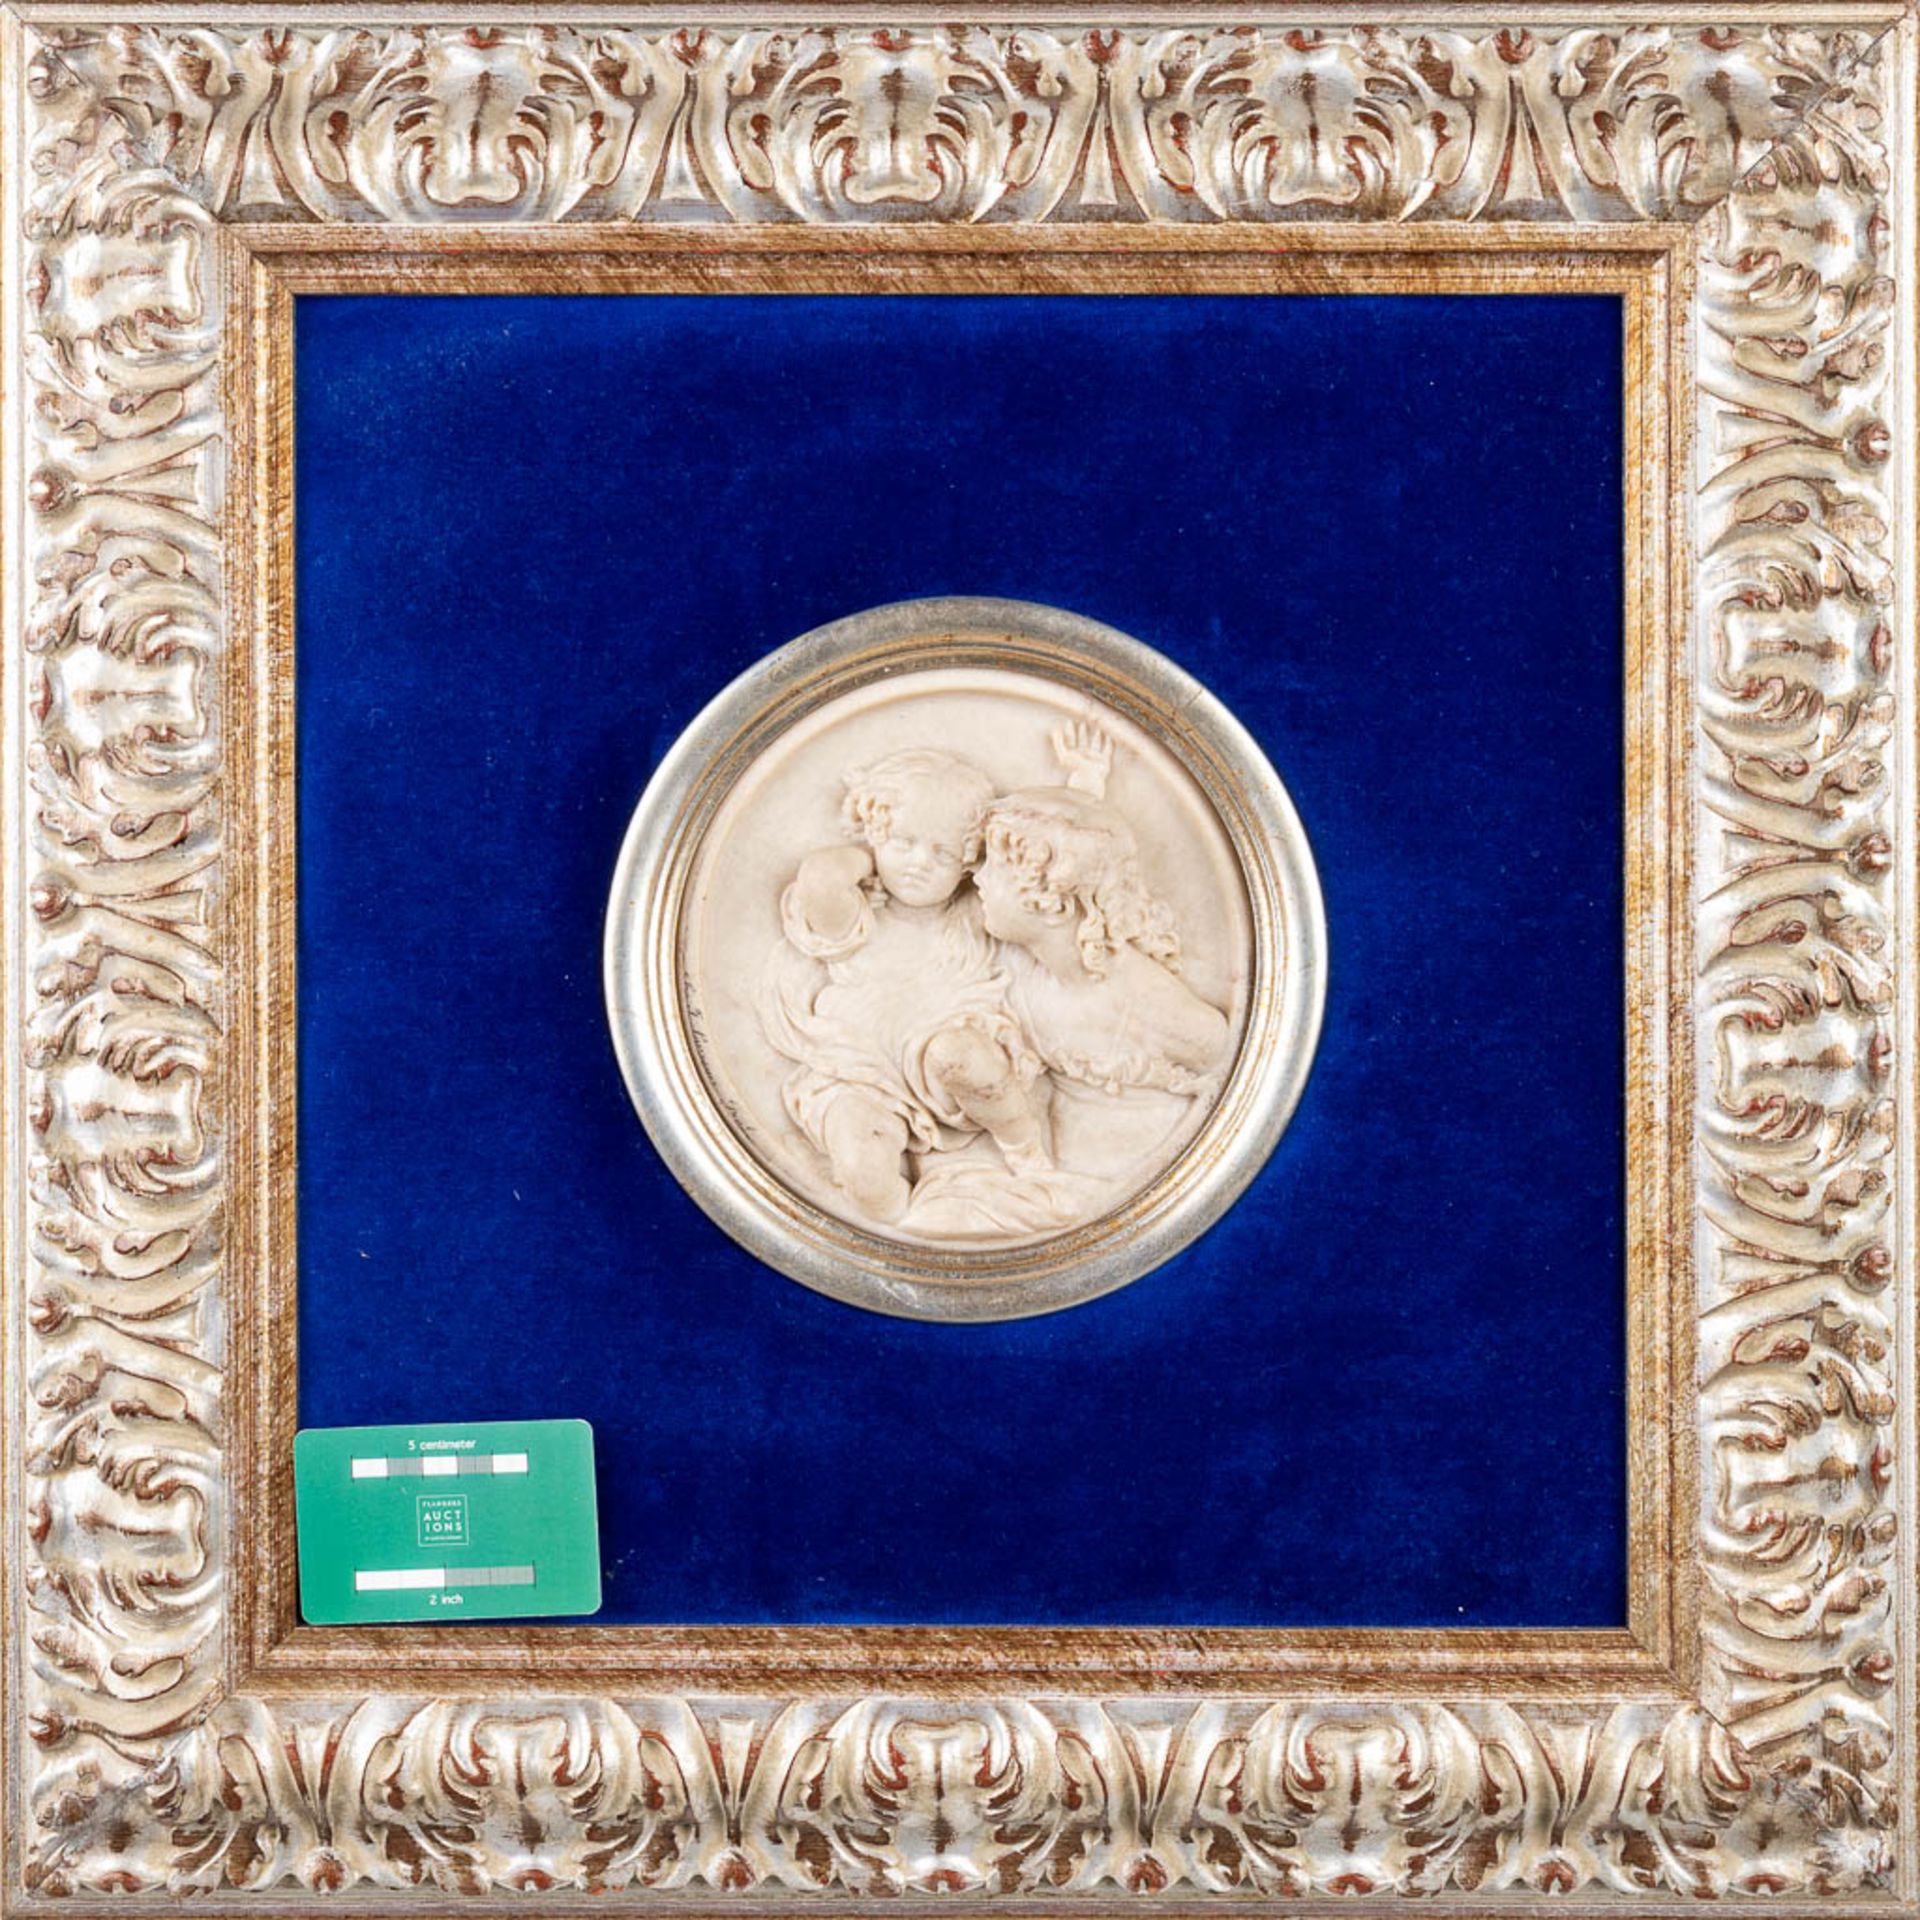 Edward William WYON (1811-1885)(attr.) A plaque made of sculptured marble with a bronze coin. - Image 5 of 8